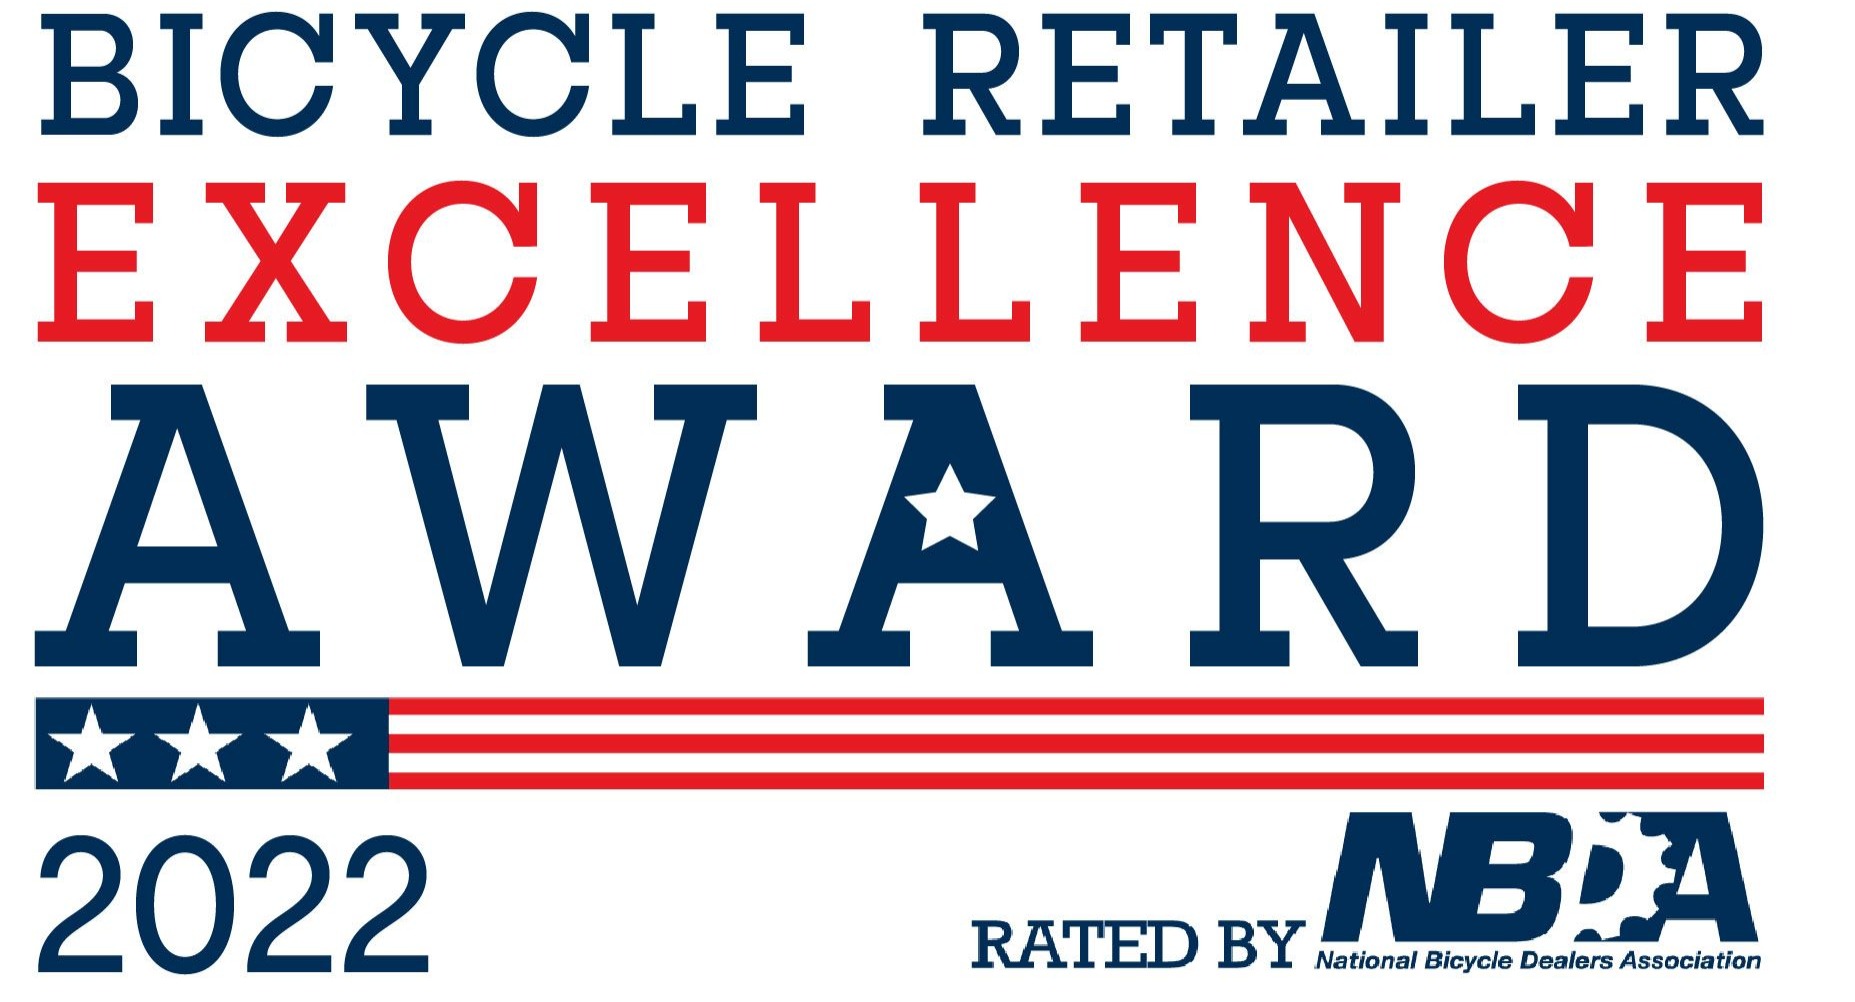 Bicycle Retailer Excellence Award Rated by NBDA